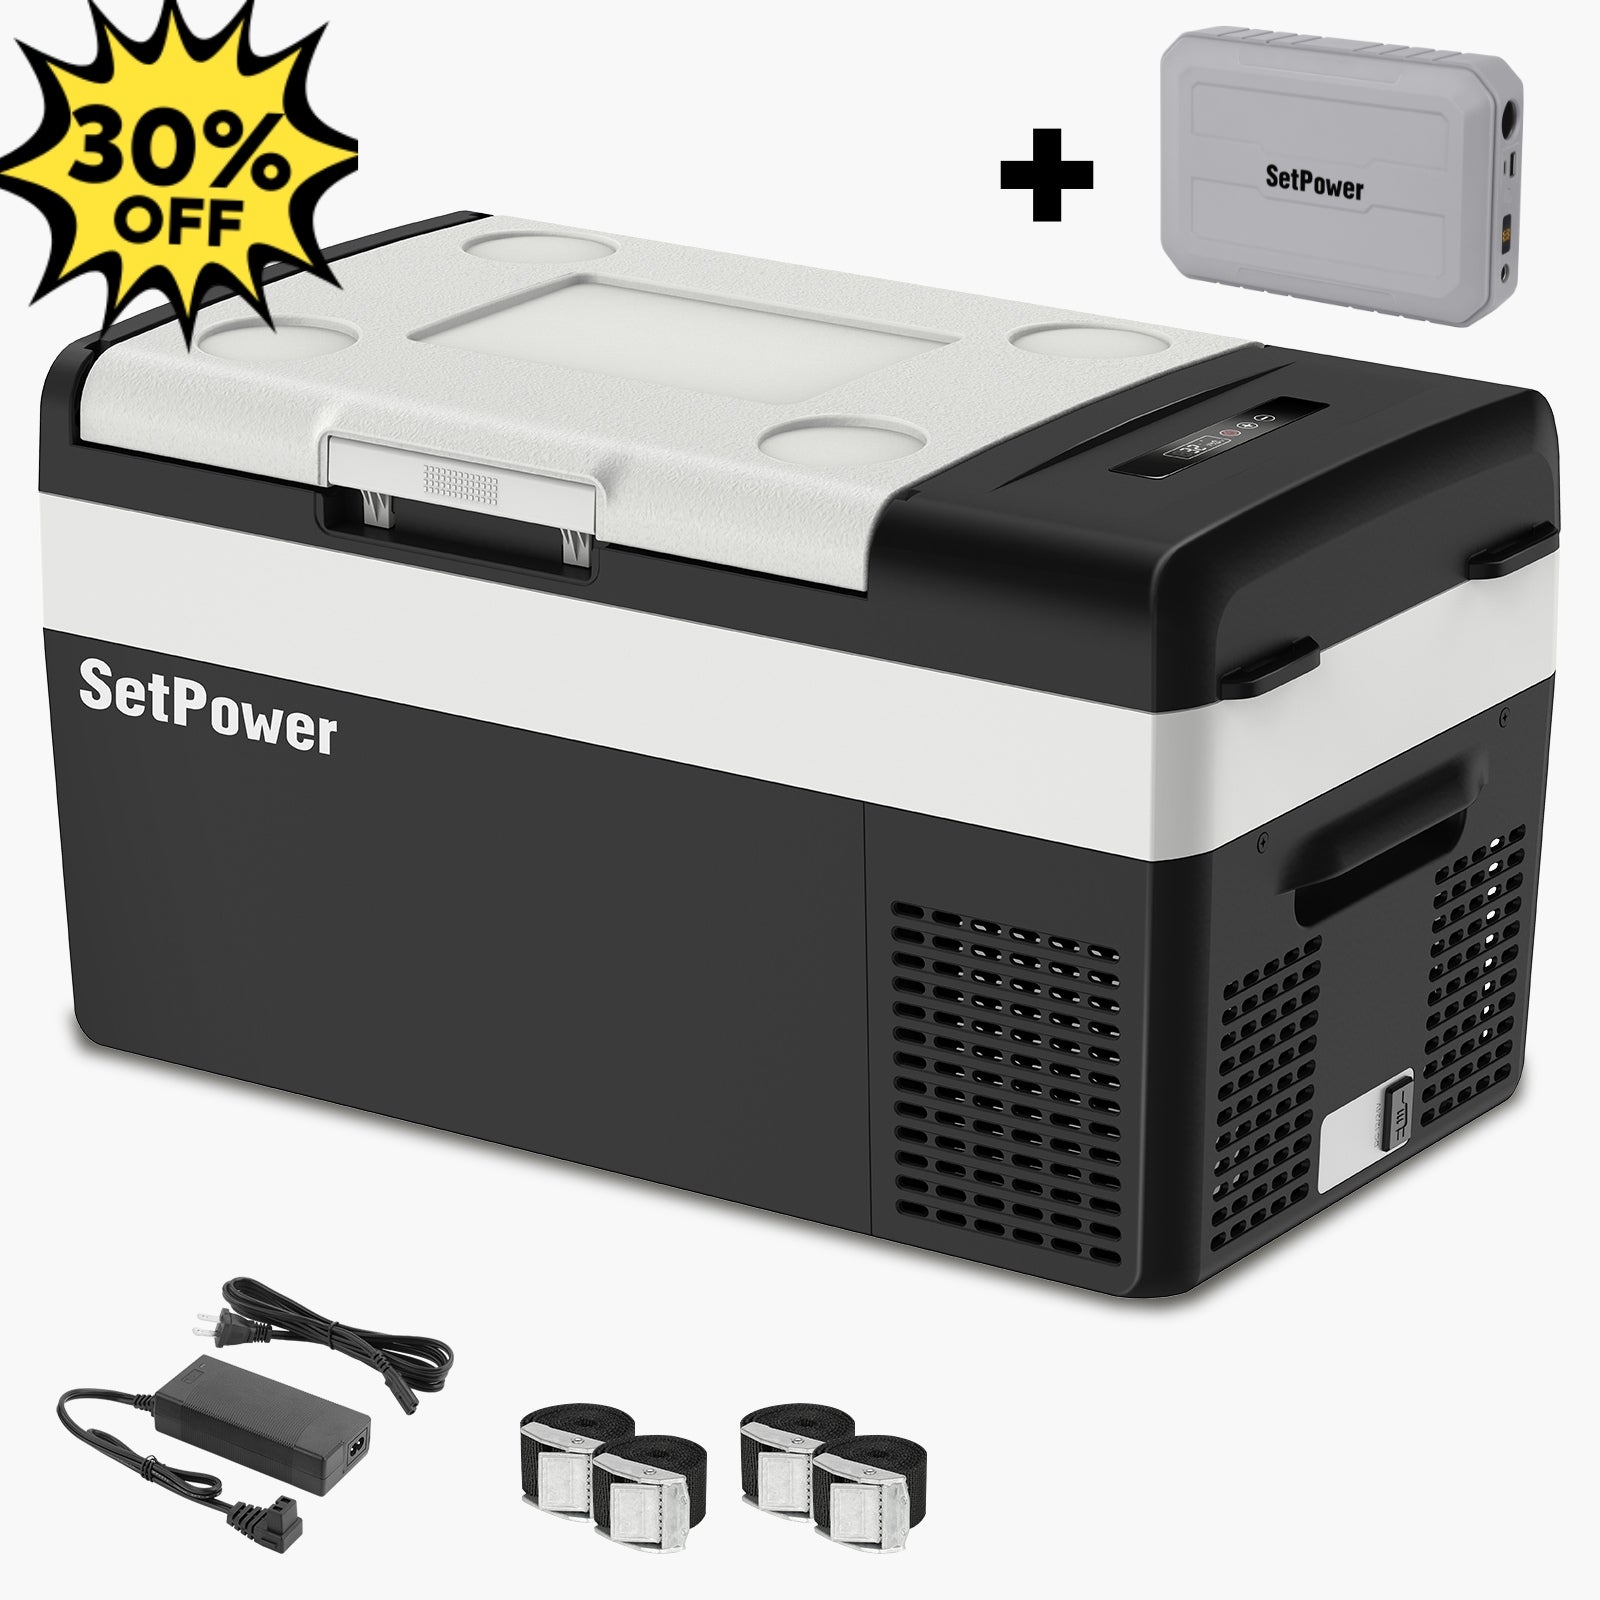 Setpower PG216Wh Portable Power Station Power Bank - $159 Only